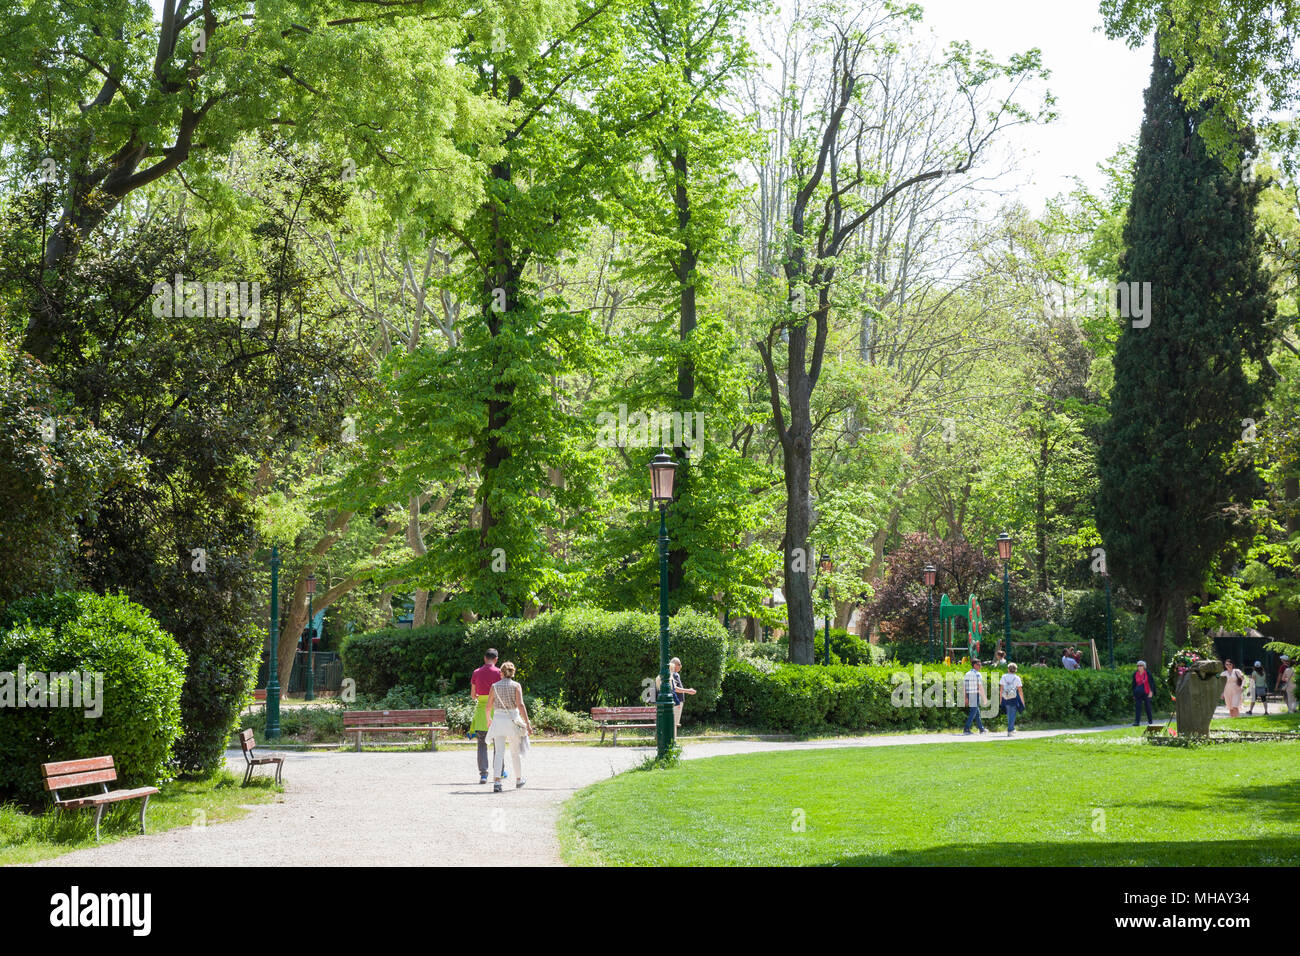 Venice in spring. People walking in the Giardini Pubblici with lush greenery and trees, Castello, Venice, Veneto, Italy Stock Photo